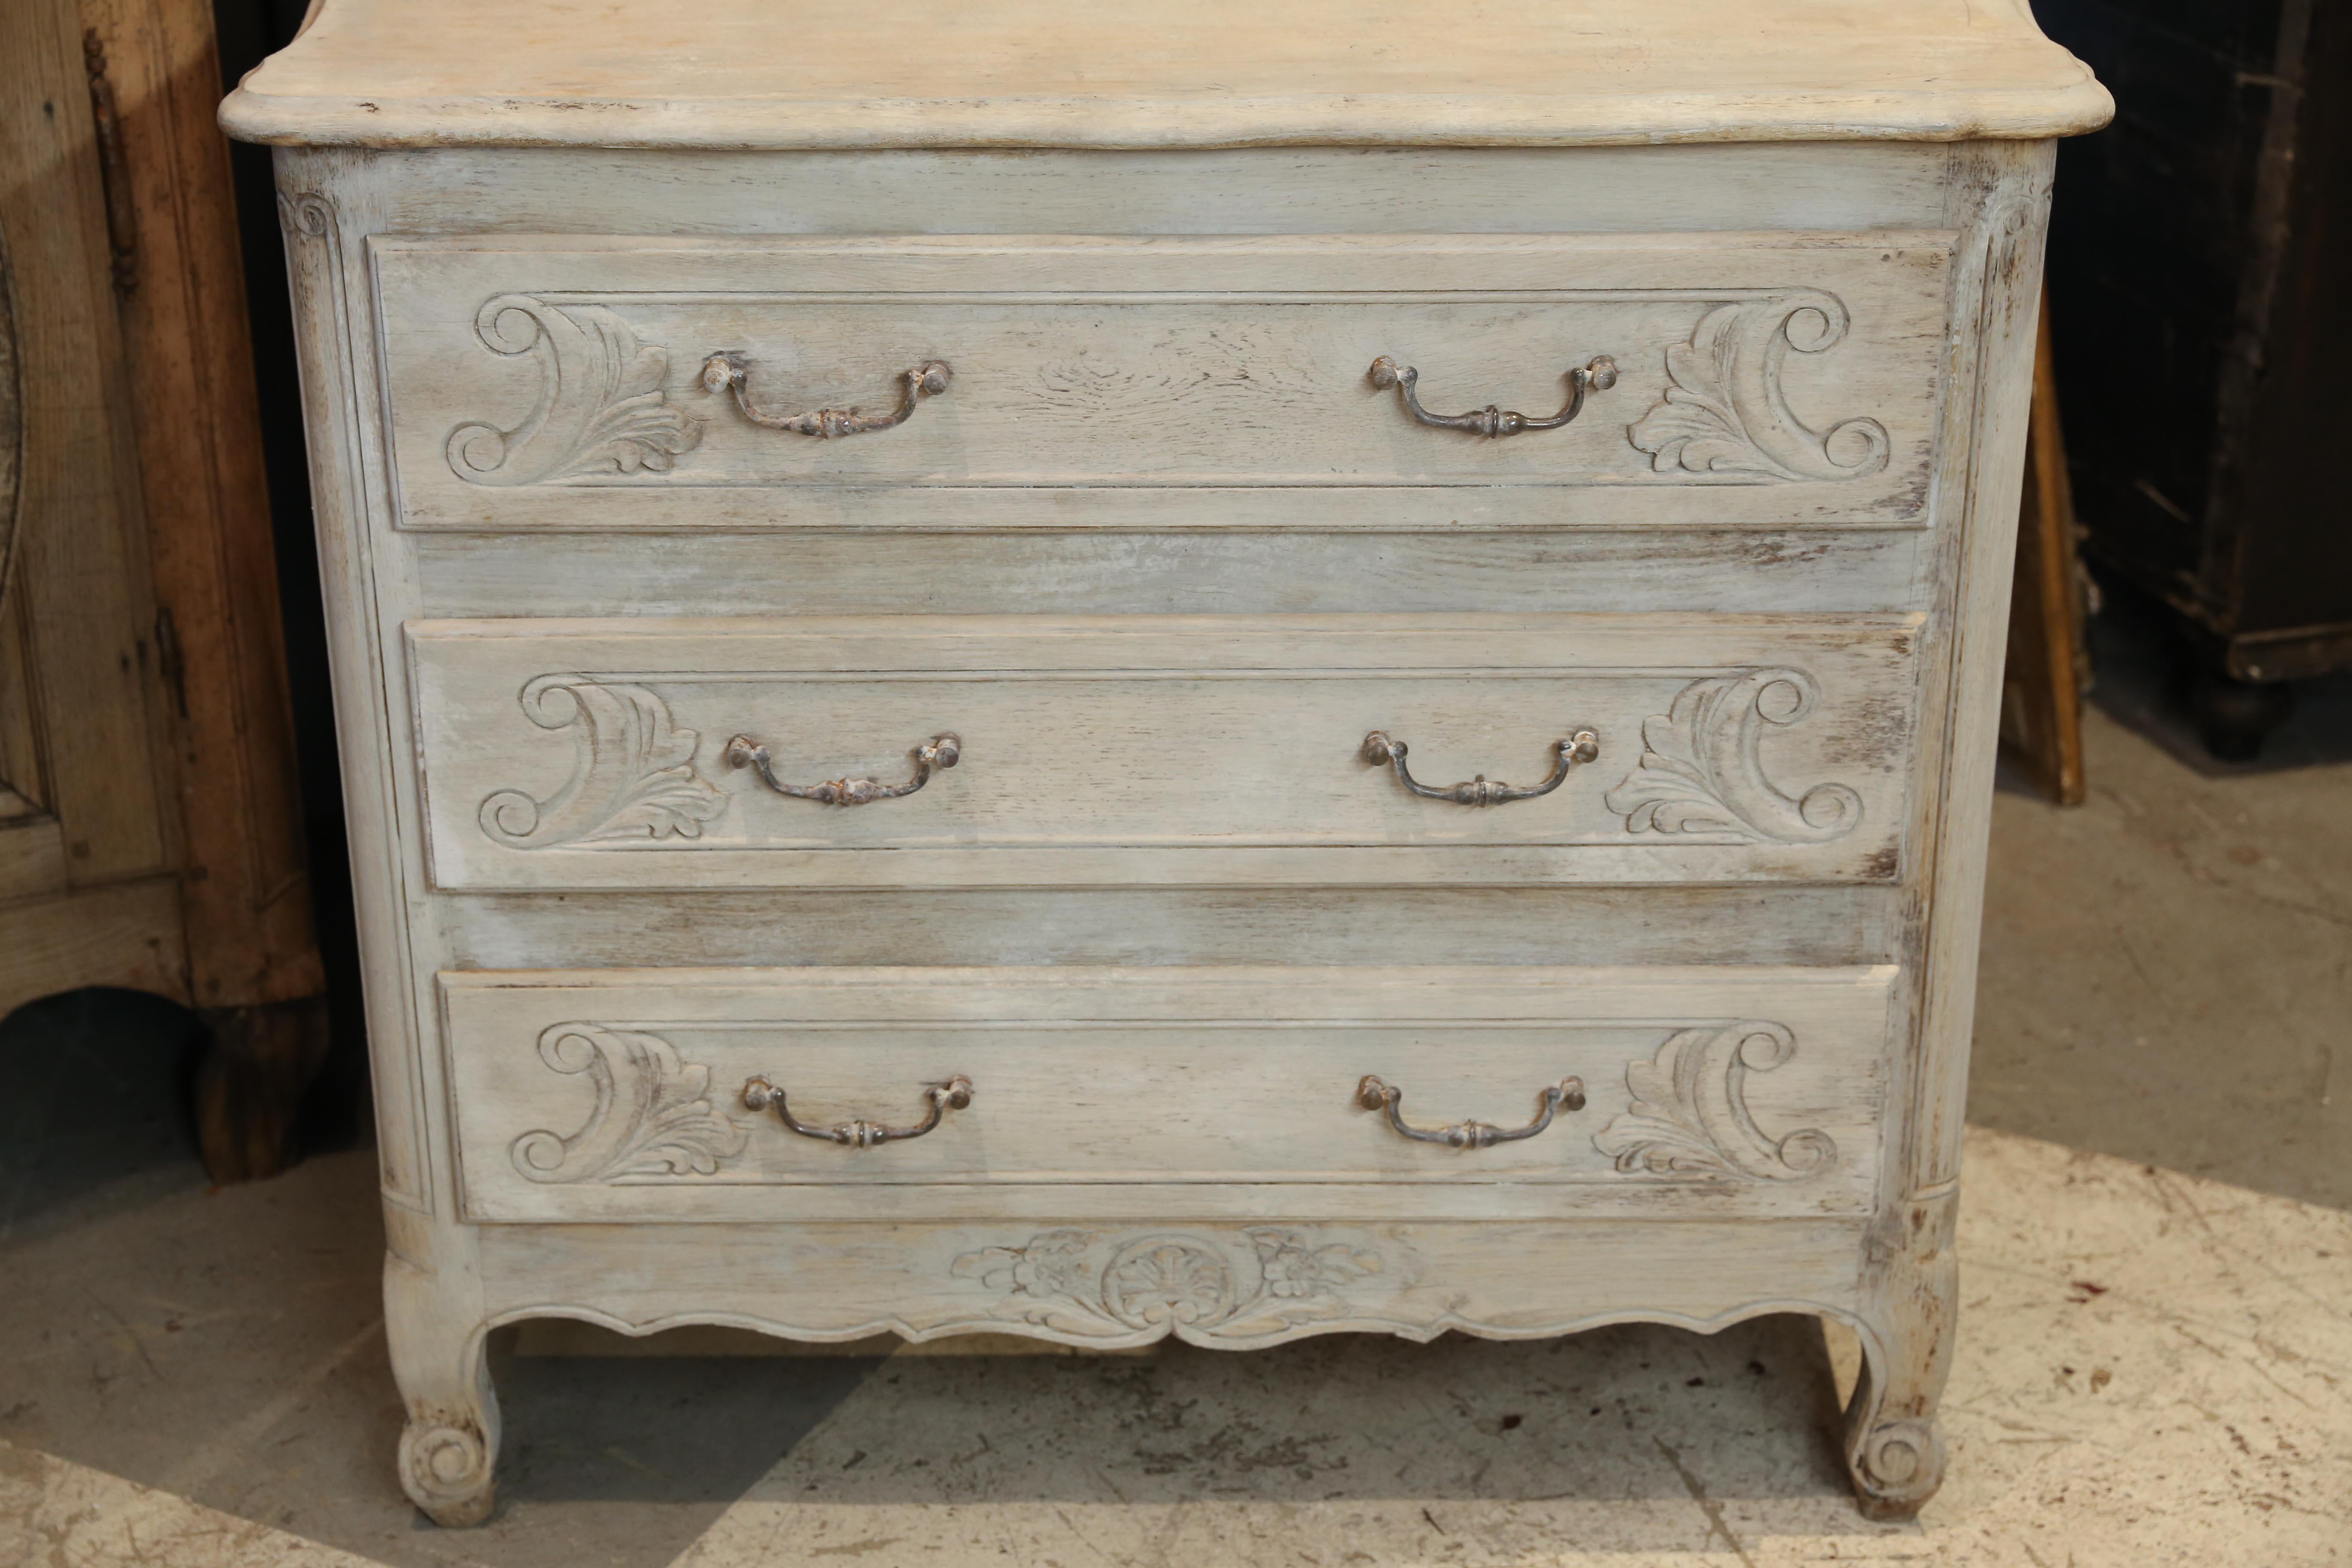 This charming and petite antique French chest of drawers features beautifully hand carved drawer fronts with iron hardware. The piece has been hand-washed with a pickled finish to brighten the wood and bring out the grain. The top of the piece has a